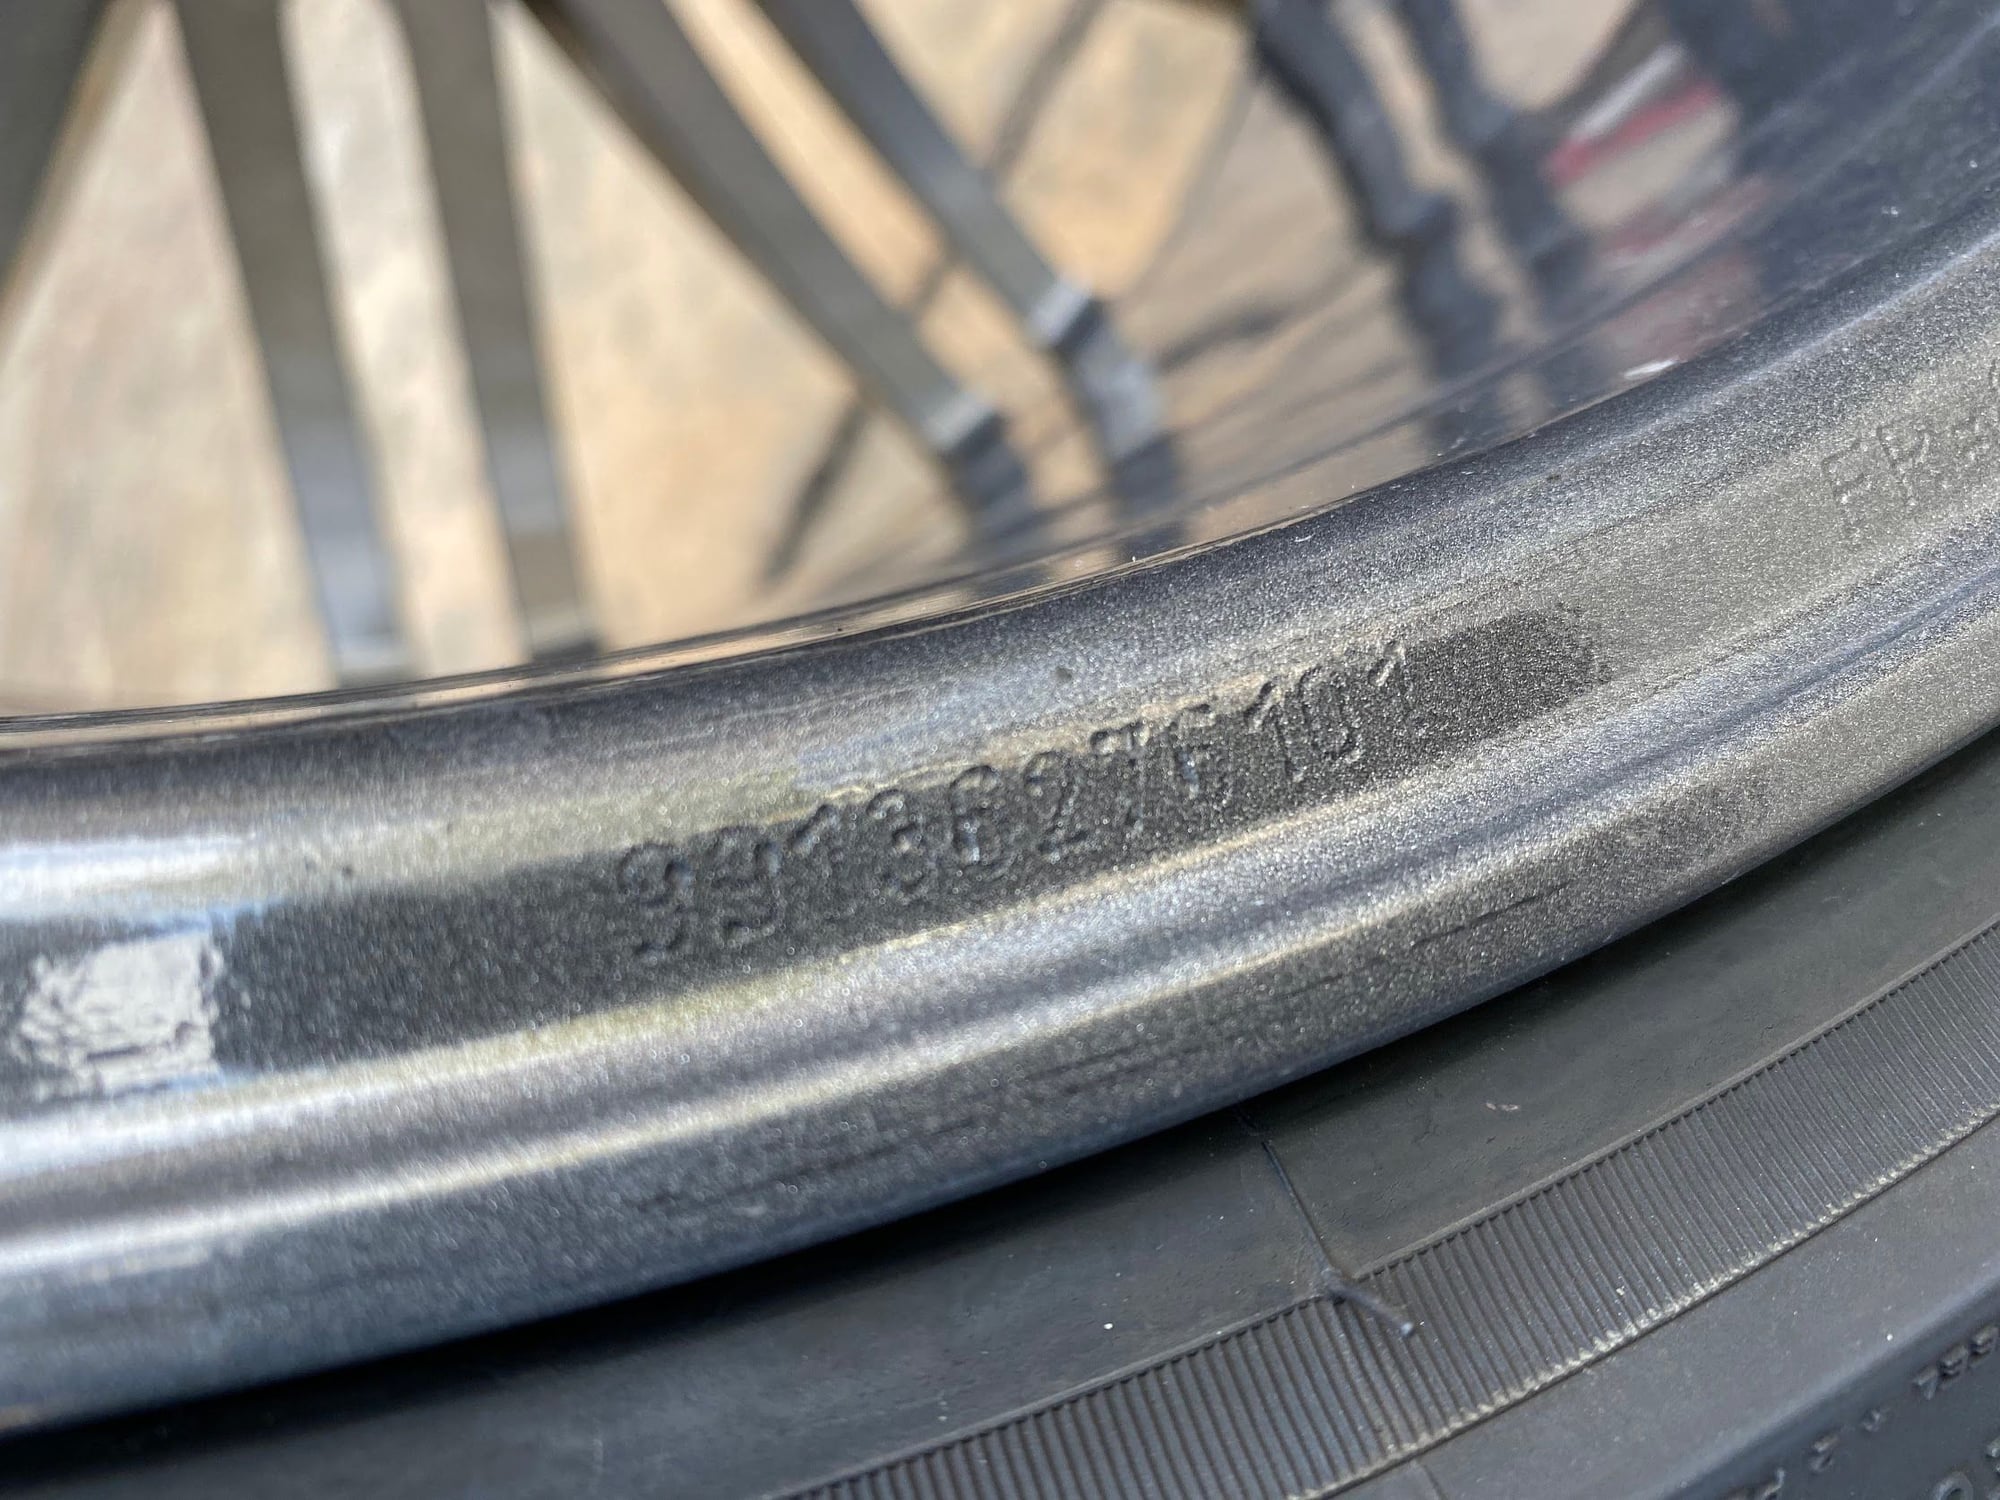 Wheels and Tires/Axles - Porsche OEM 20-inch "Turbo IV" FORGED aluminum-alloy wheels - Used - 2012 to 2019 Porsche 911 - Thousand Oaks, CA 91360, United States